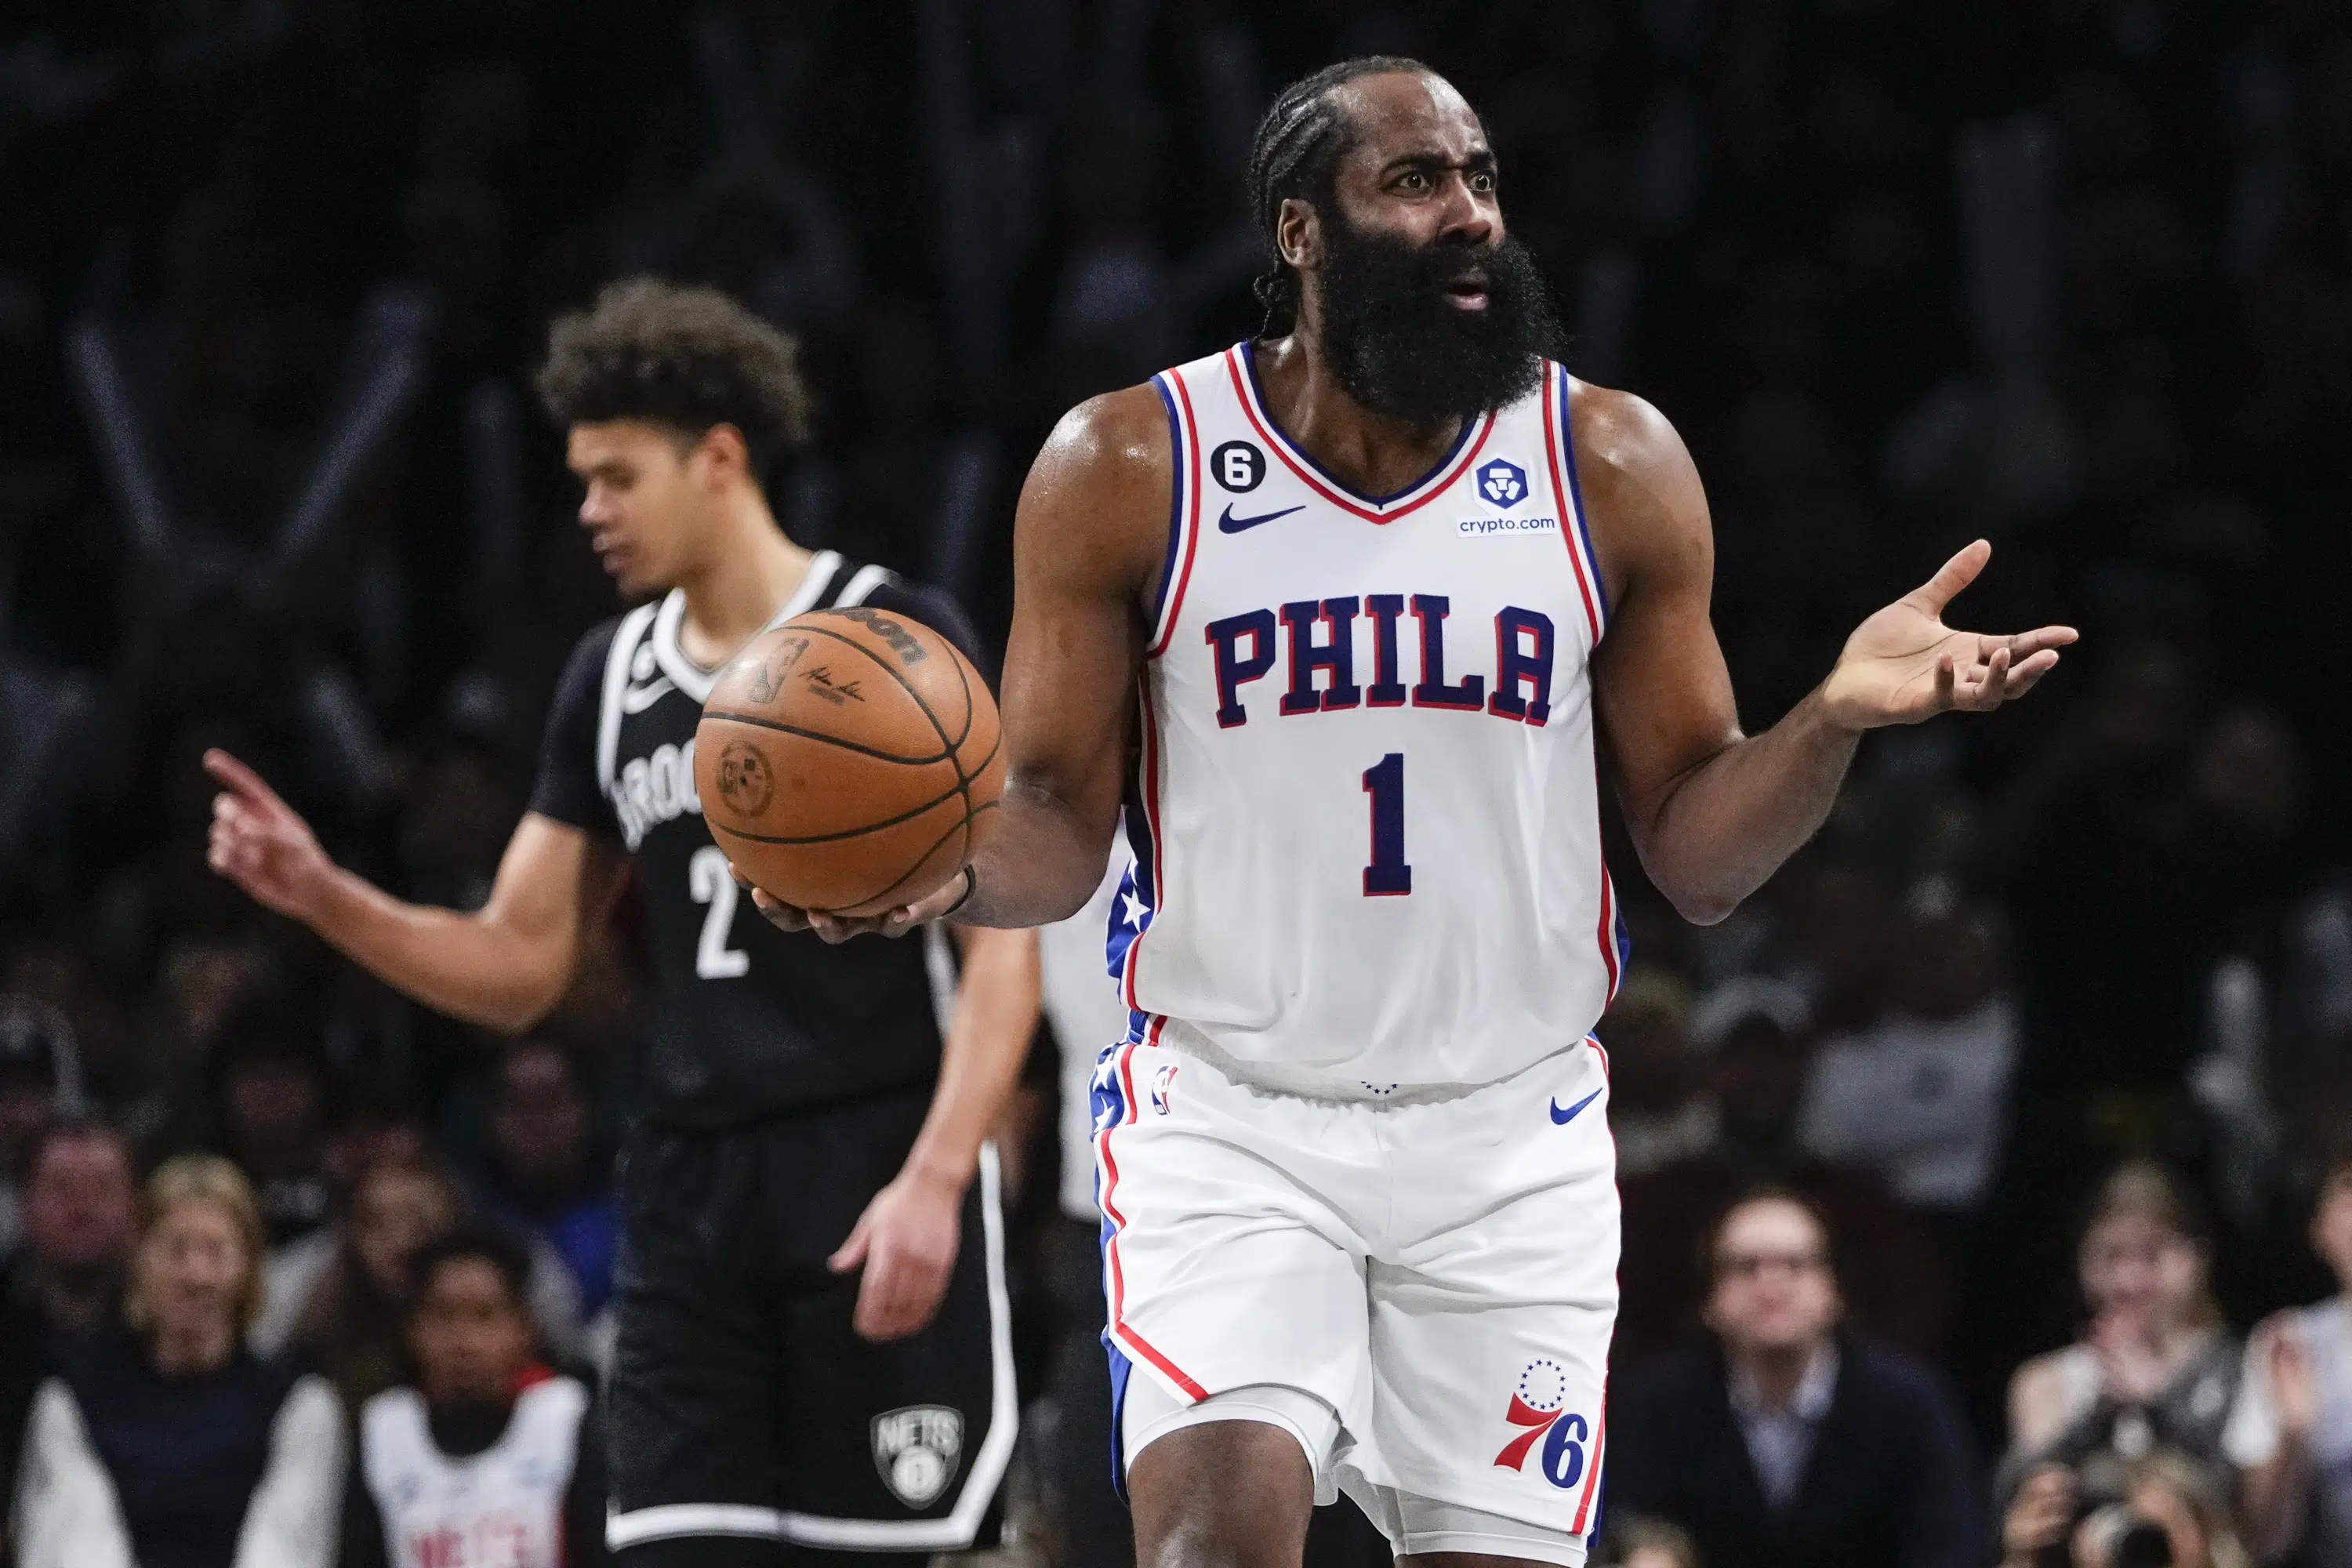 Harden was ejected, but the Nets didn’t have Embiid for hip shots